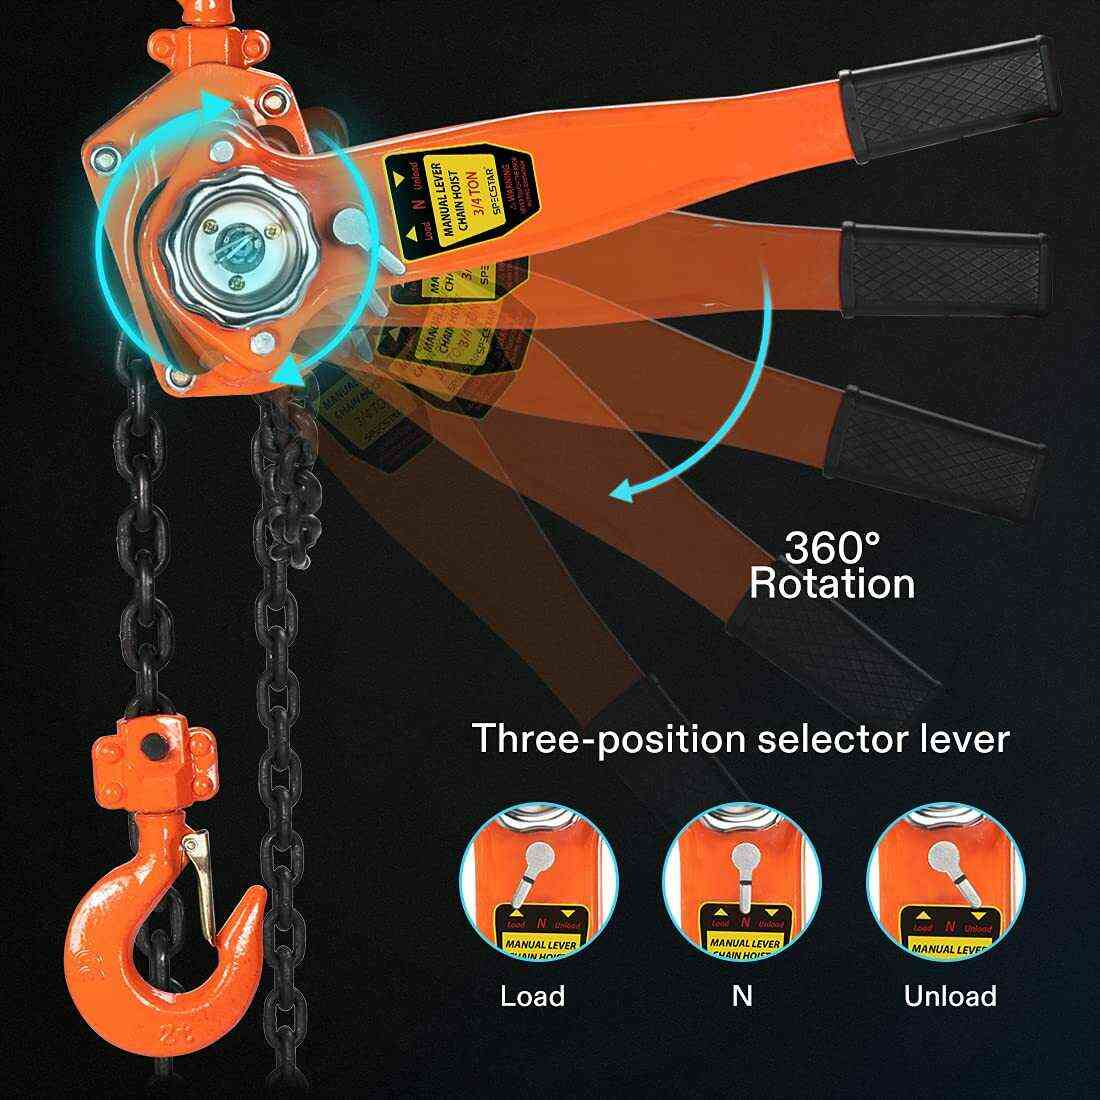 SPECSTAR Lever Chain Hoist Duty 2 VIVOHOME – with Heavy Hooks